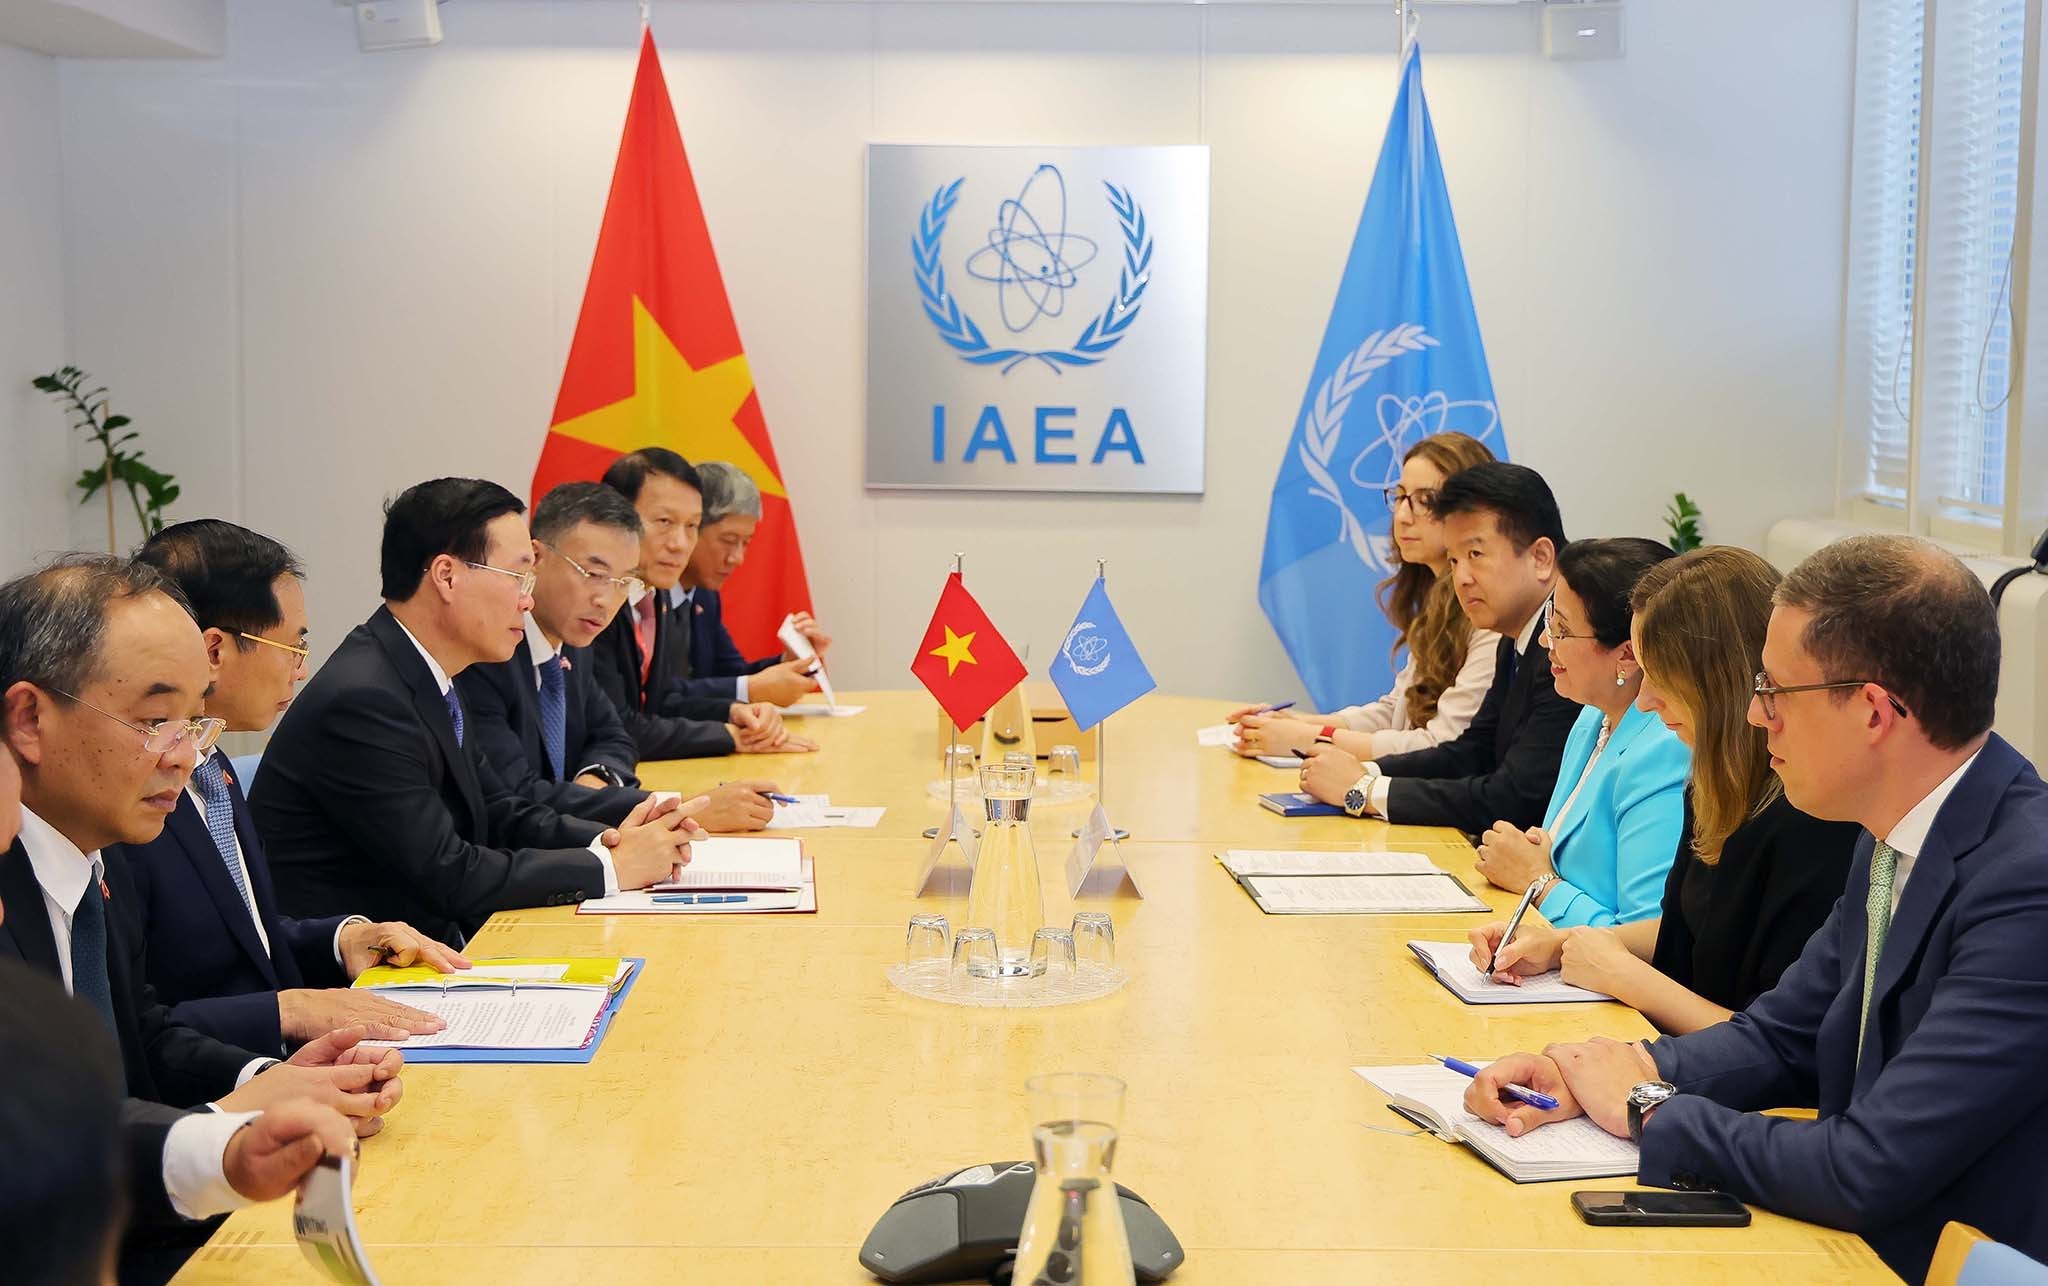 President Vo Van Thuong received Acting Director General of IAEA